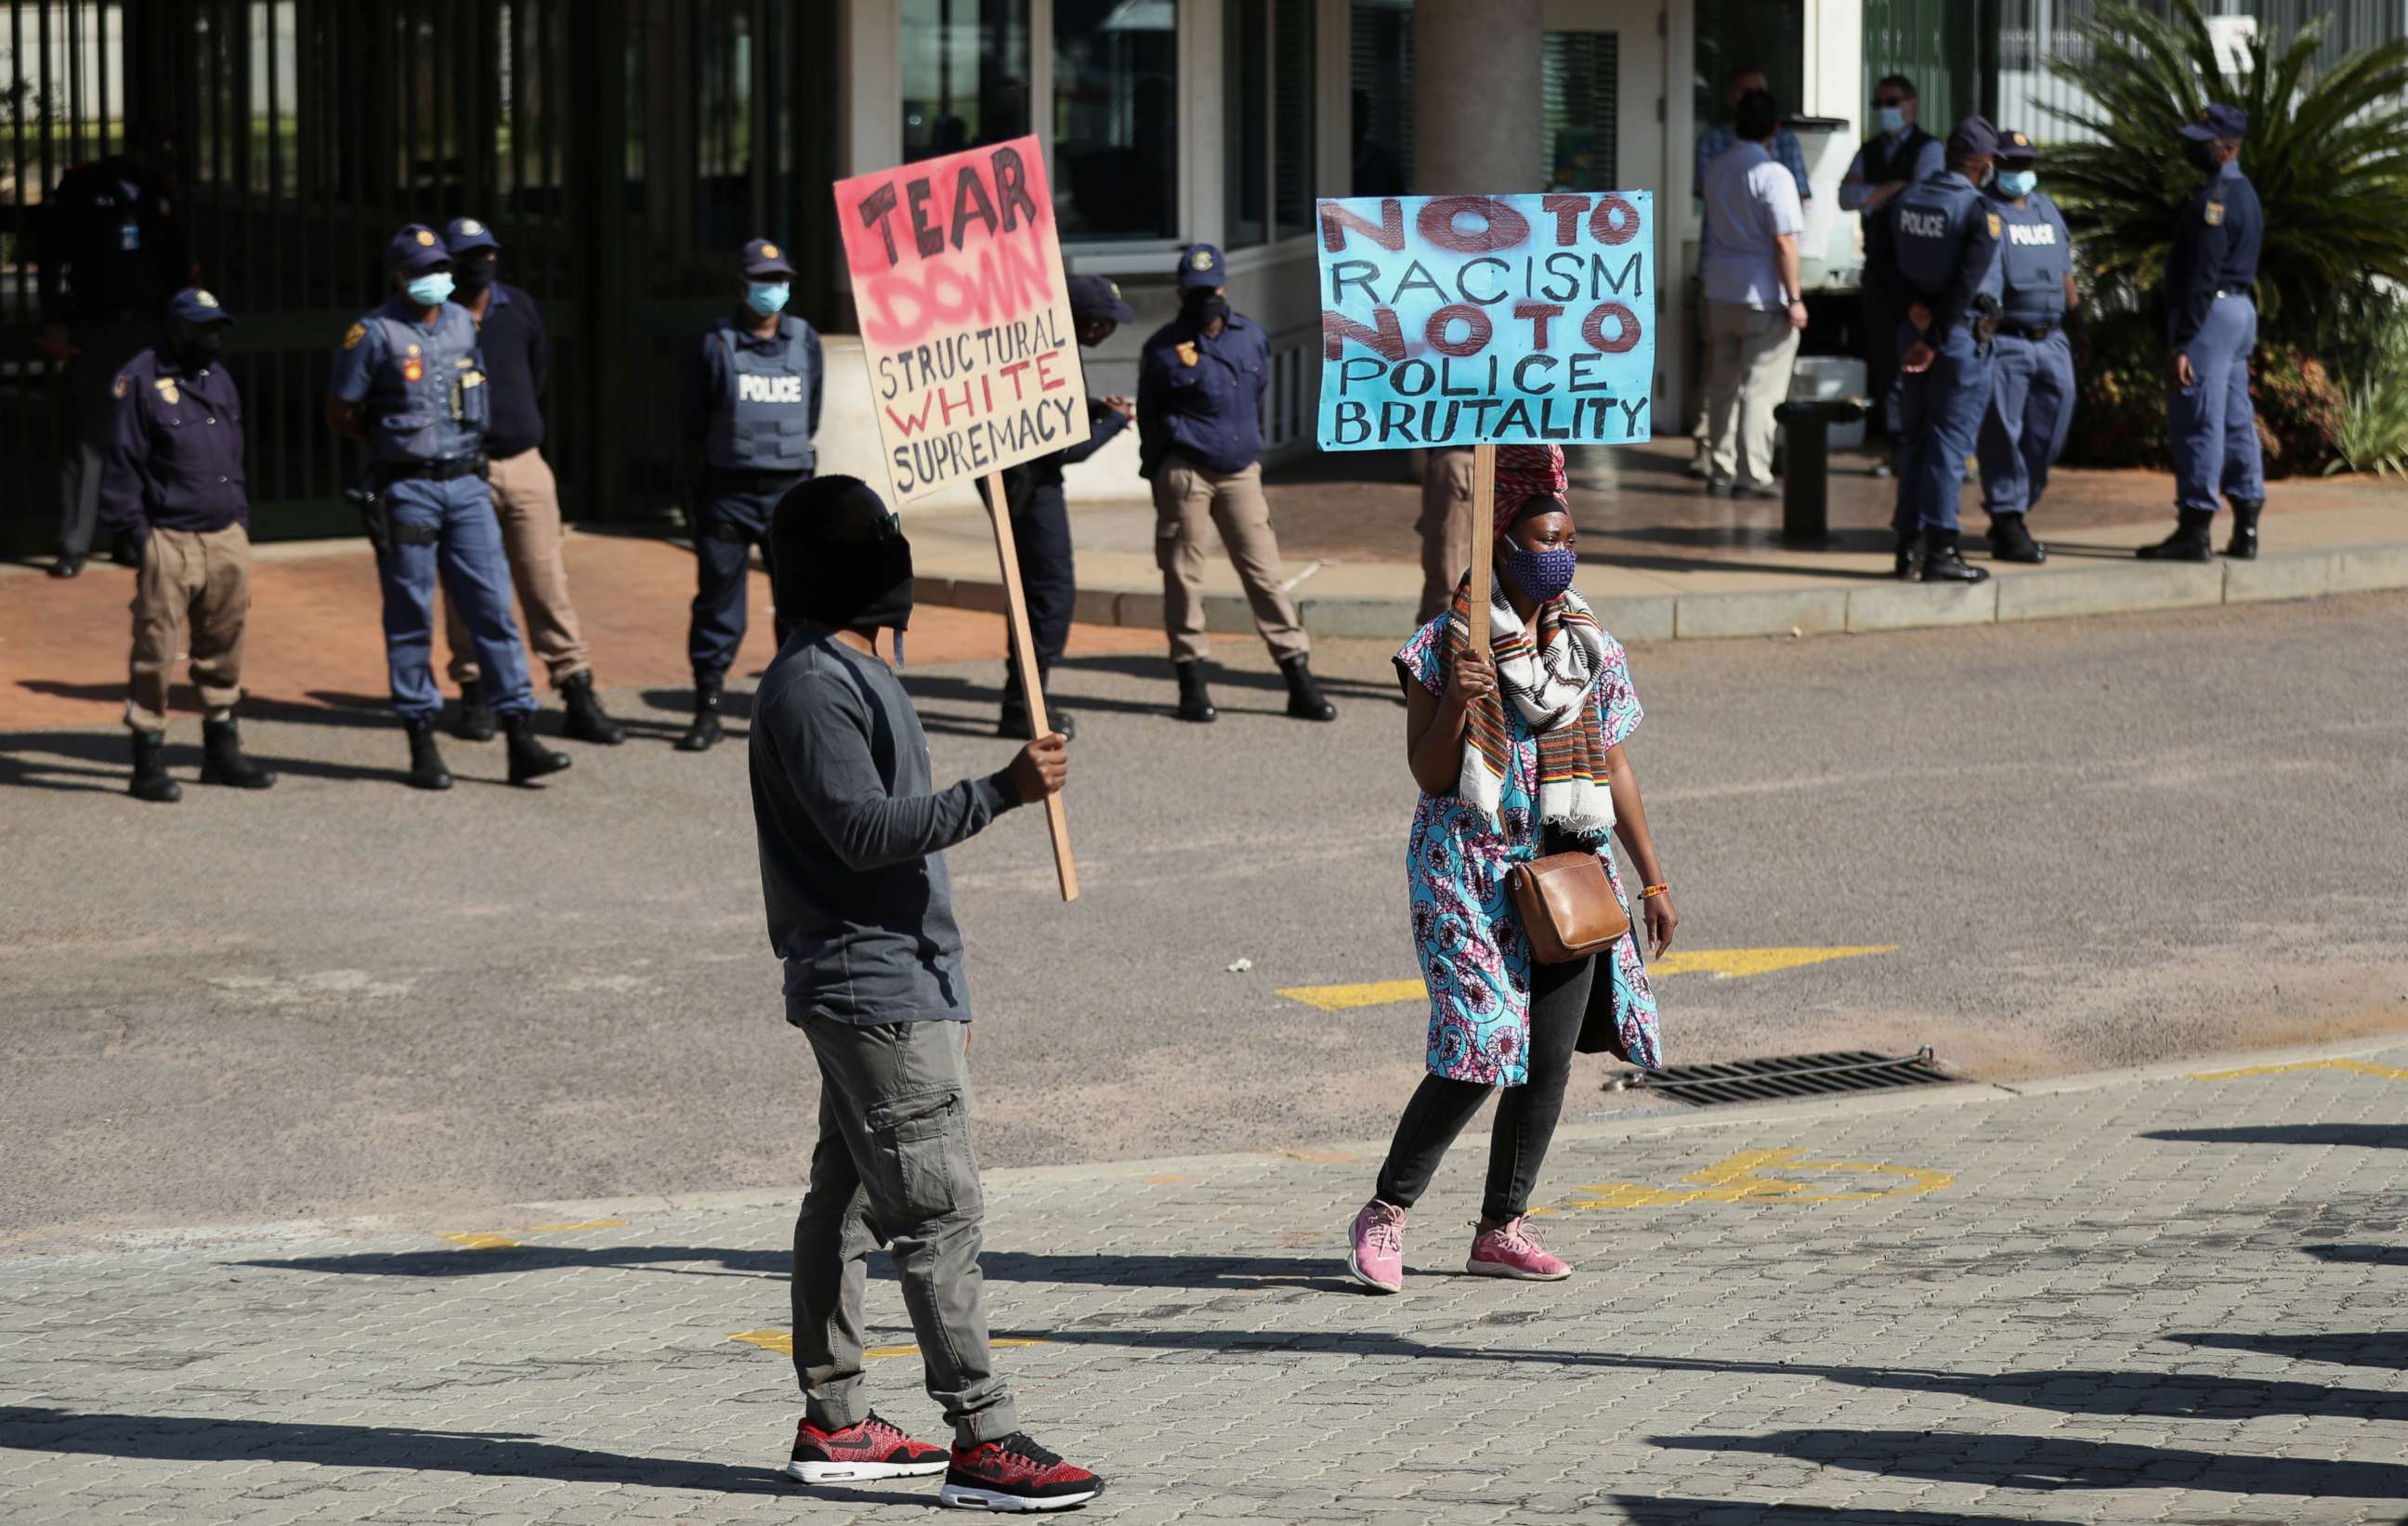 PHOTO: Protesters hold signs as they demonstrate against the death of George Floyd in the U.S., and Collins Khoza, who died after a confrontation with South African security forces, outside the U.S. embassy in Pretoria, South Africa, June 5, 2020.